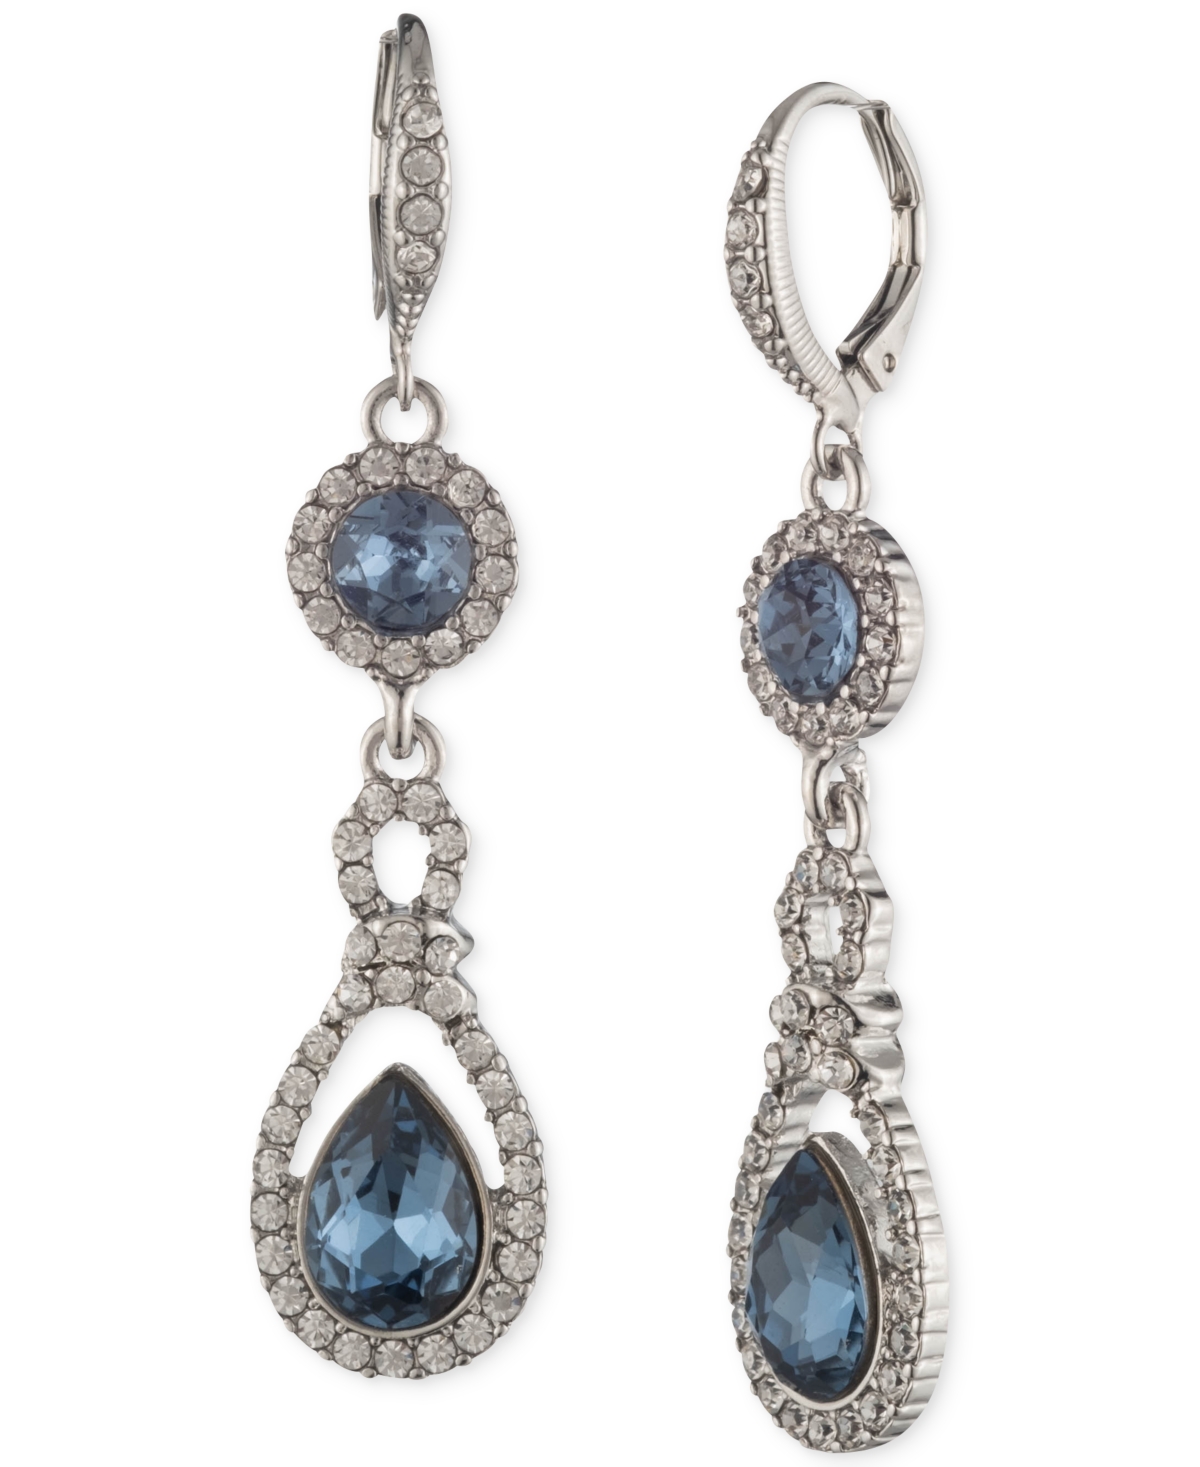 Givenchy Silver-Tone Pave Crystal & Blue Crystal Double Drop Earrings